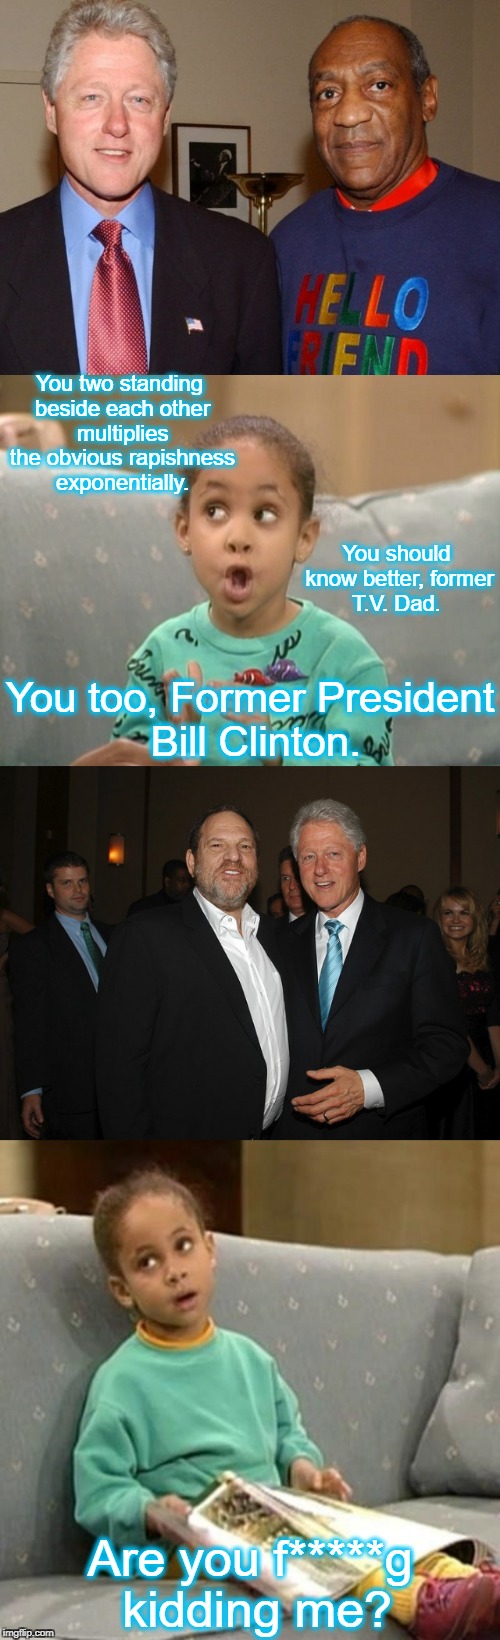 Olivia explains it all. | You two standing beside each other multiplies the obvious rapishness exponentially. You should know better, former T.V. Dad. You too, Former President Bill Clinton. Are you f*****g kidding me? | image tagged in harvey weinstein,bill clinton,bill cosby | made w/ Imgflip meme maker